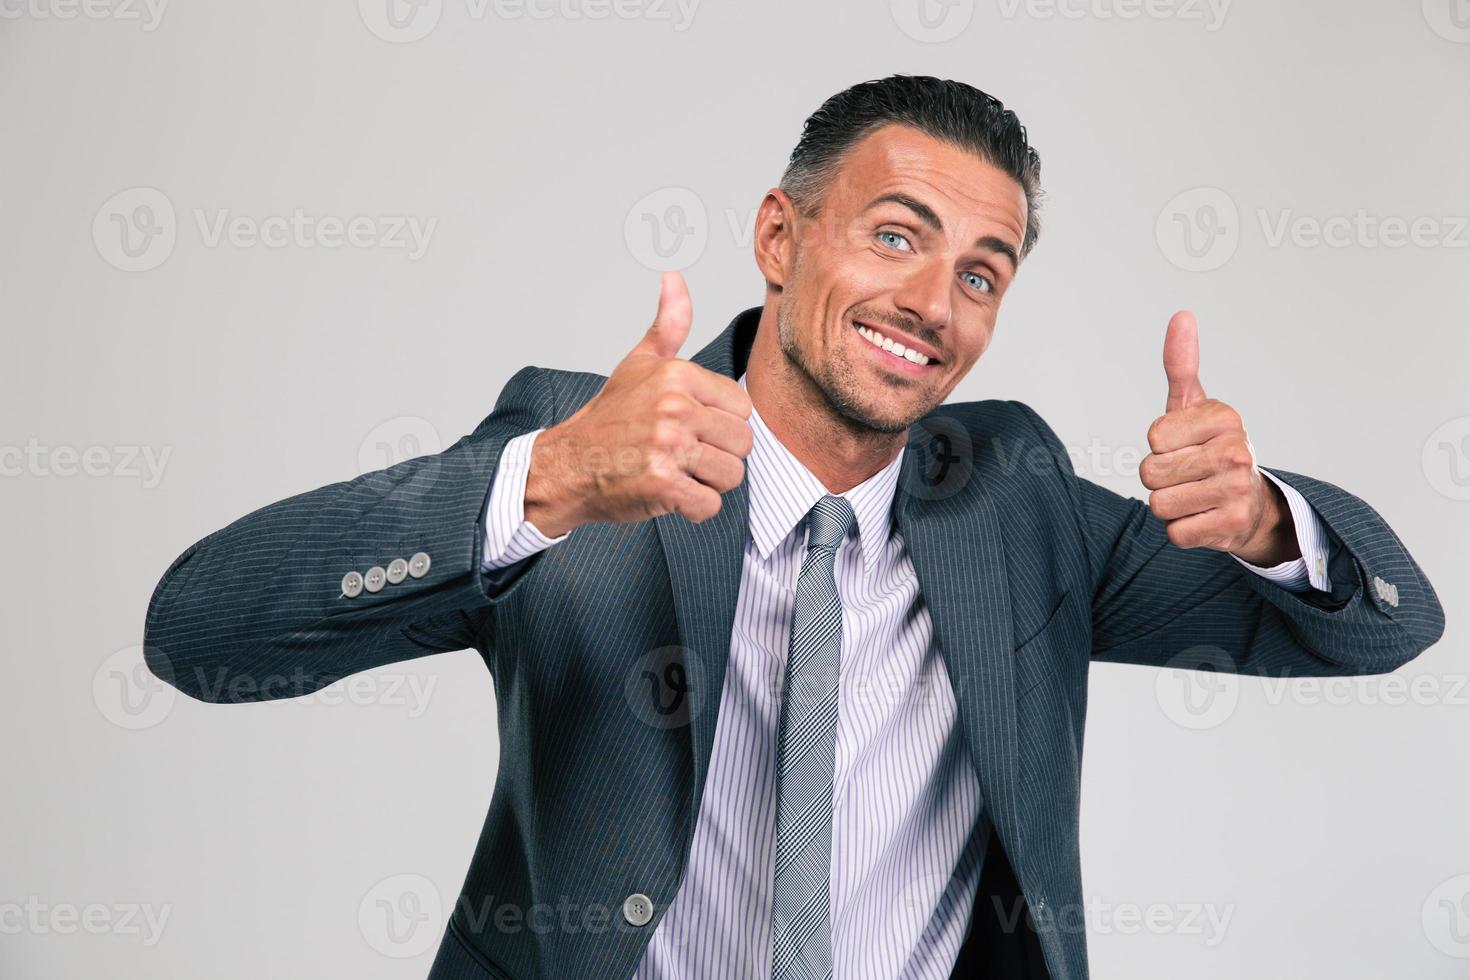 Funny man showing thumbs up 1116149 Stock Photo at Vecteezy